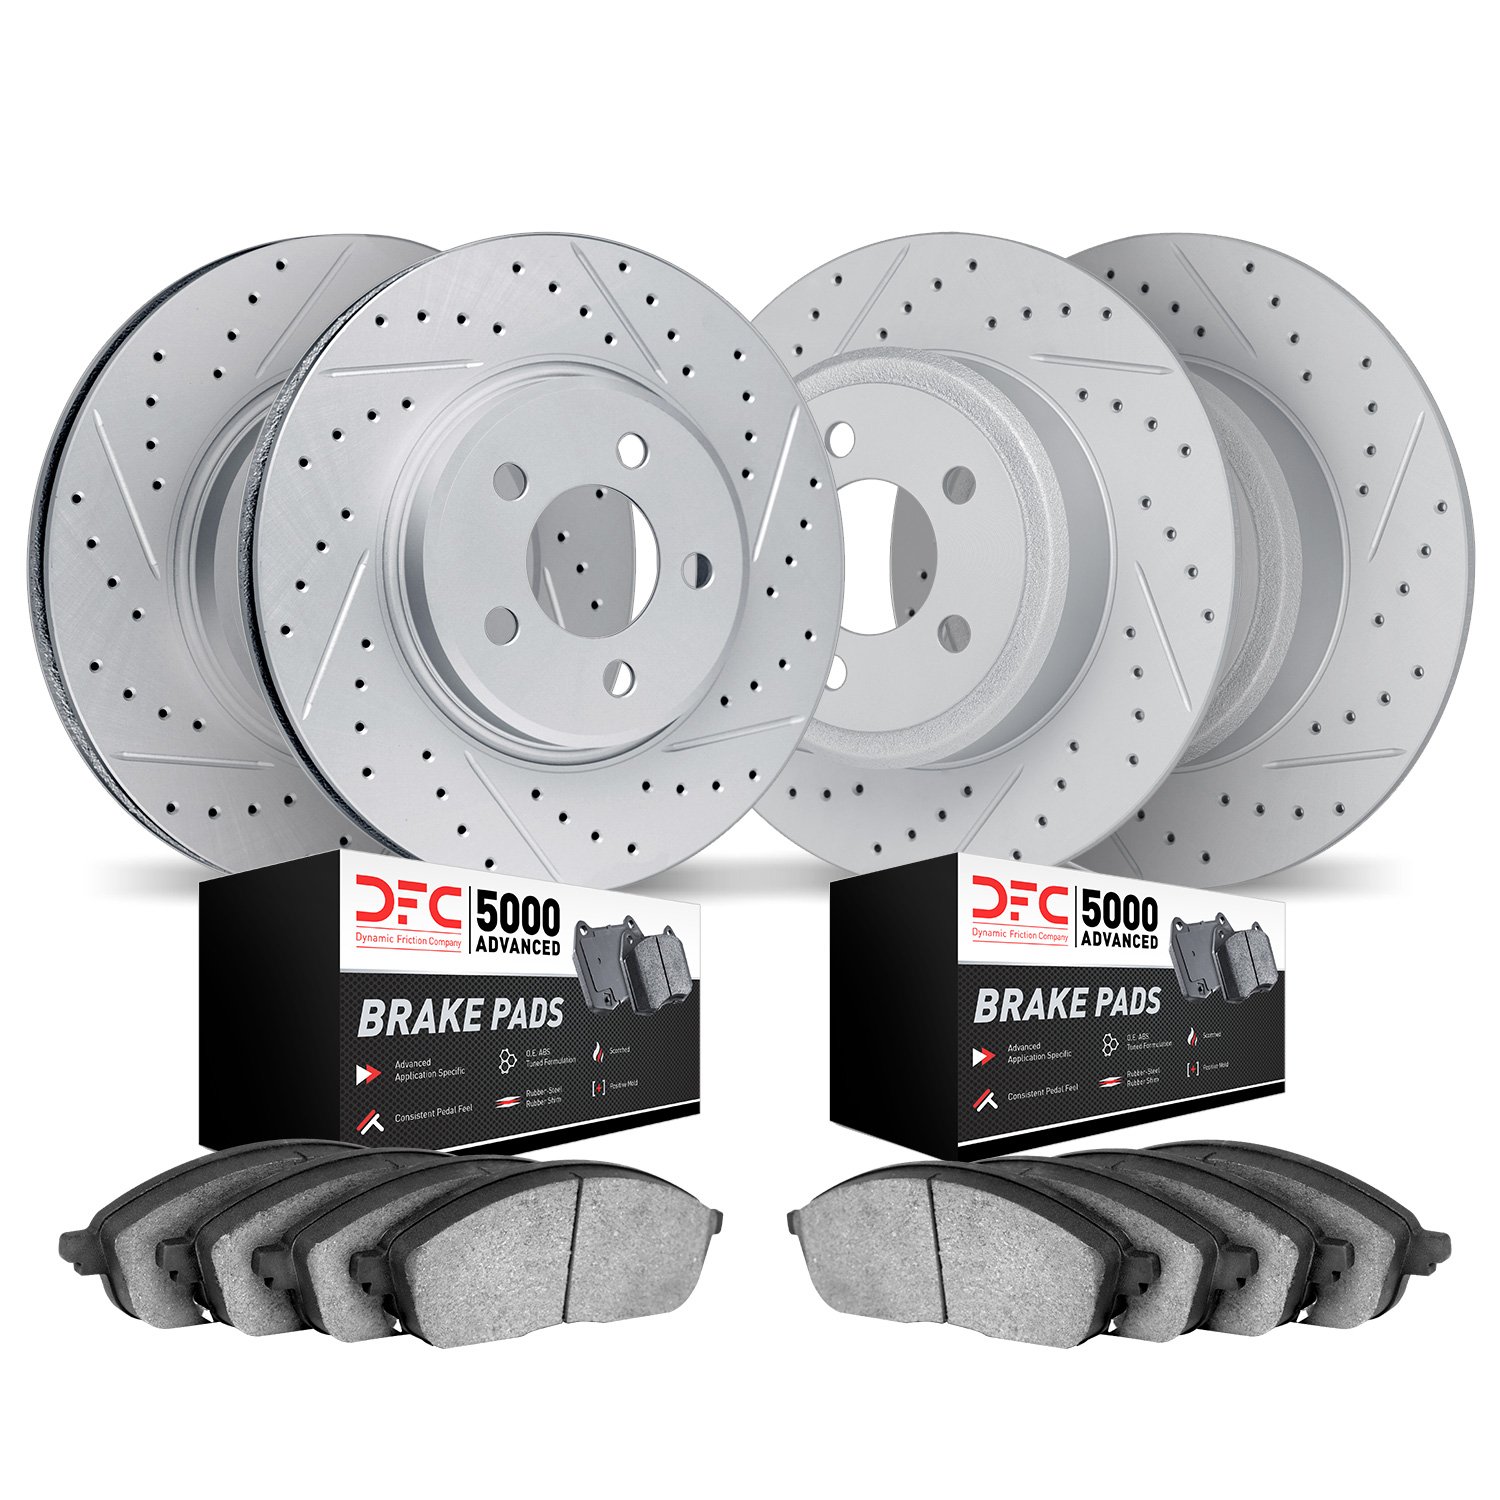 2504-54310 Geoperformance Drilled/Slotted Rotors w/5000 Advanced Brake Pads Kit, 2016-2018 Ford/Lincoln/Mercury/Mazda, Position: